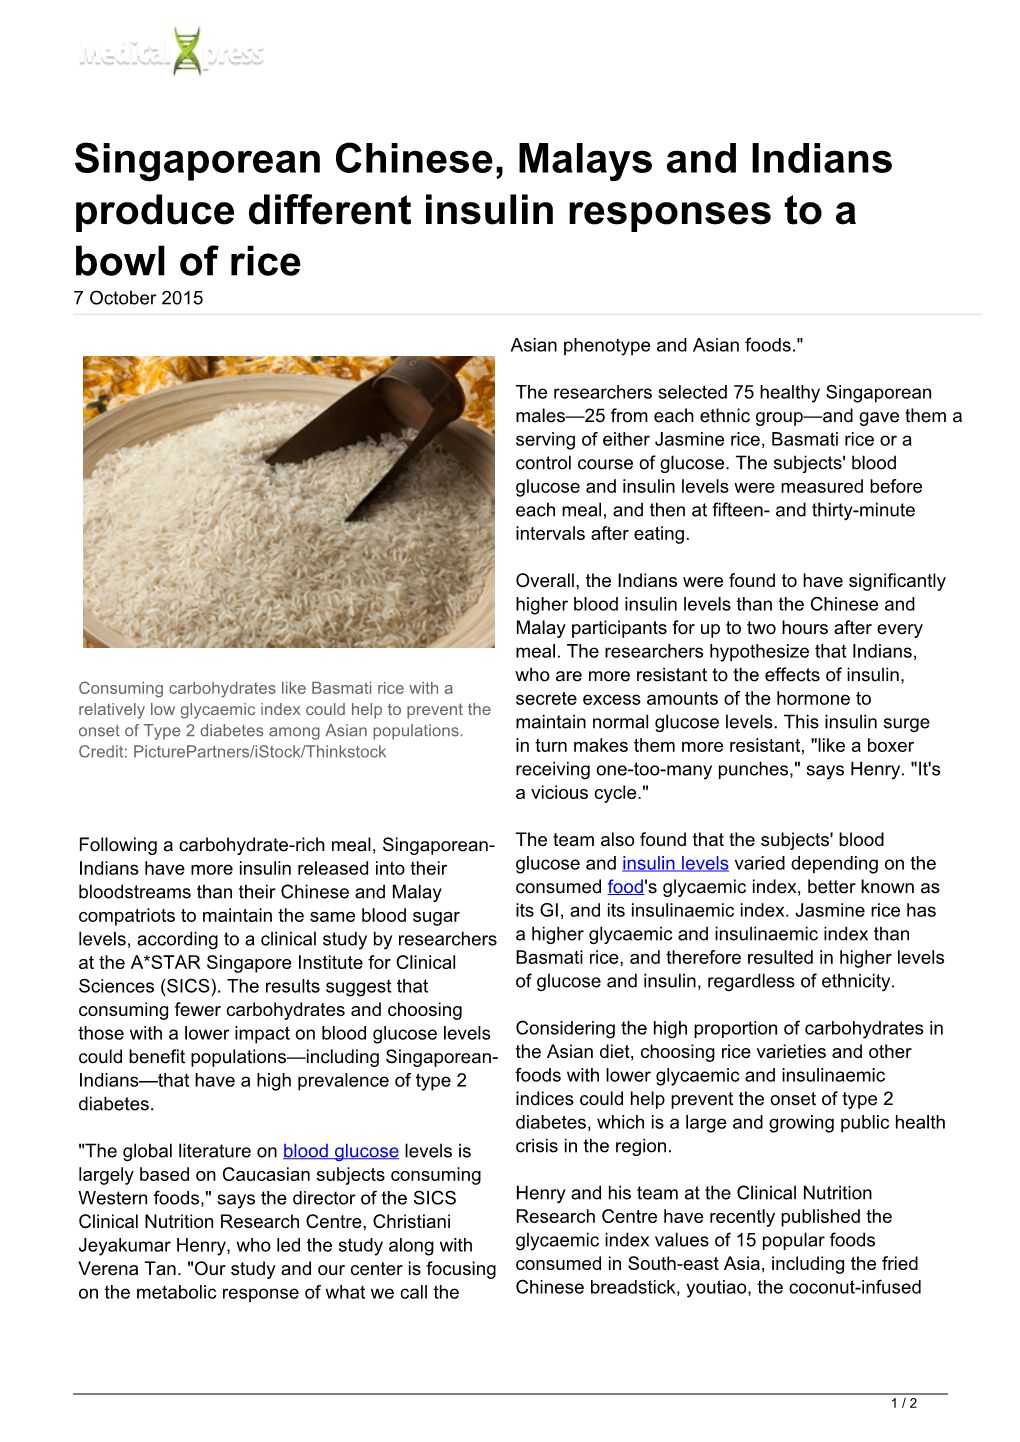 Singaporean Chinese, Malays and Indians Produce Different Insulin Responses to a Bowl of Rice 7 October 2015